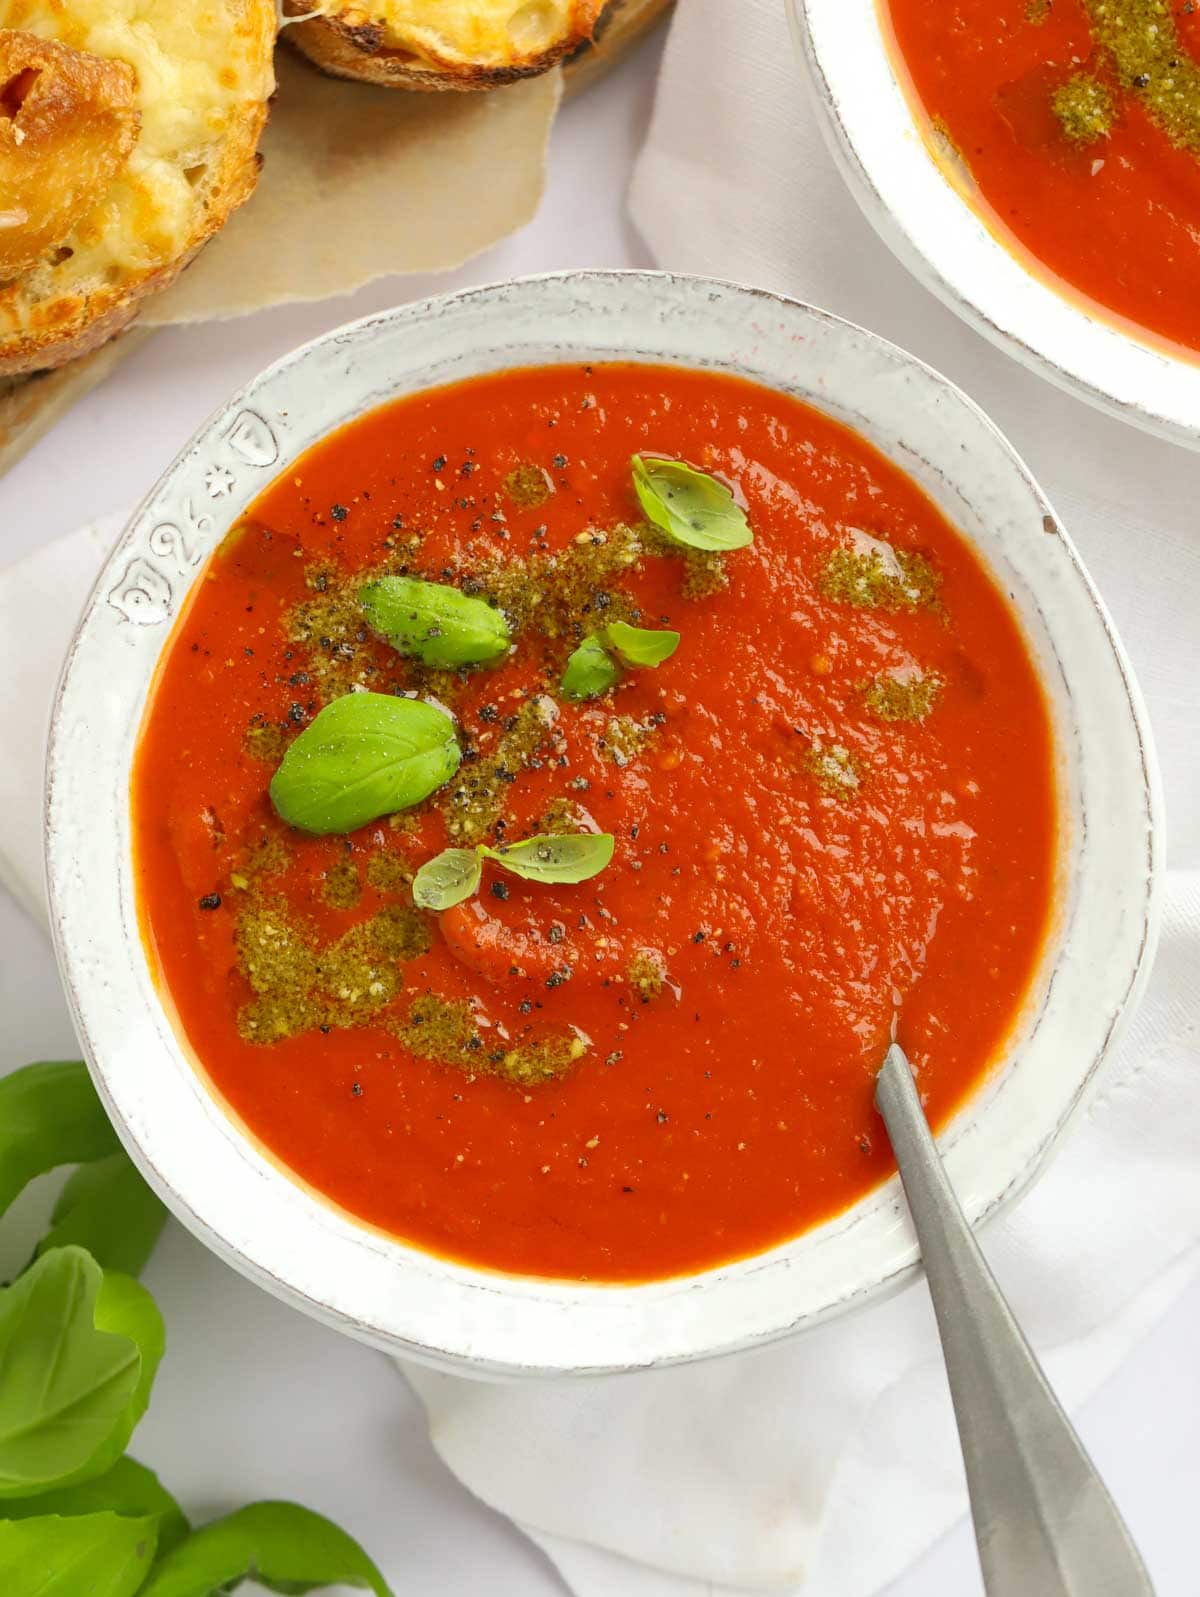 Easy Tomato Soup recipe ready in 20 minutes and garnished with pesto.